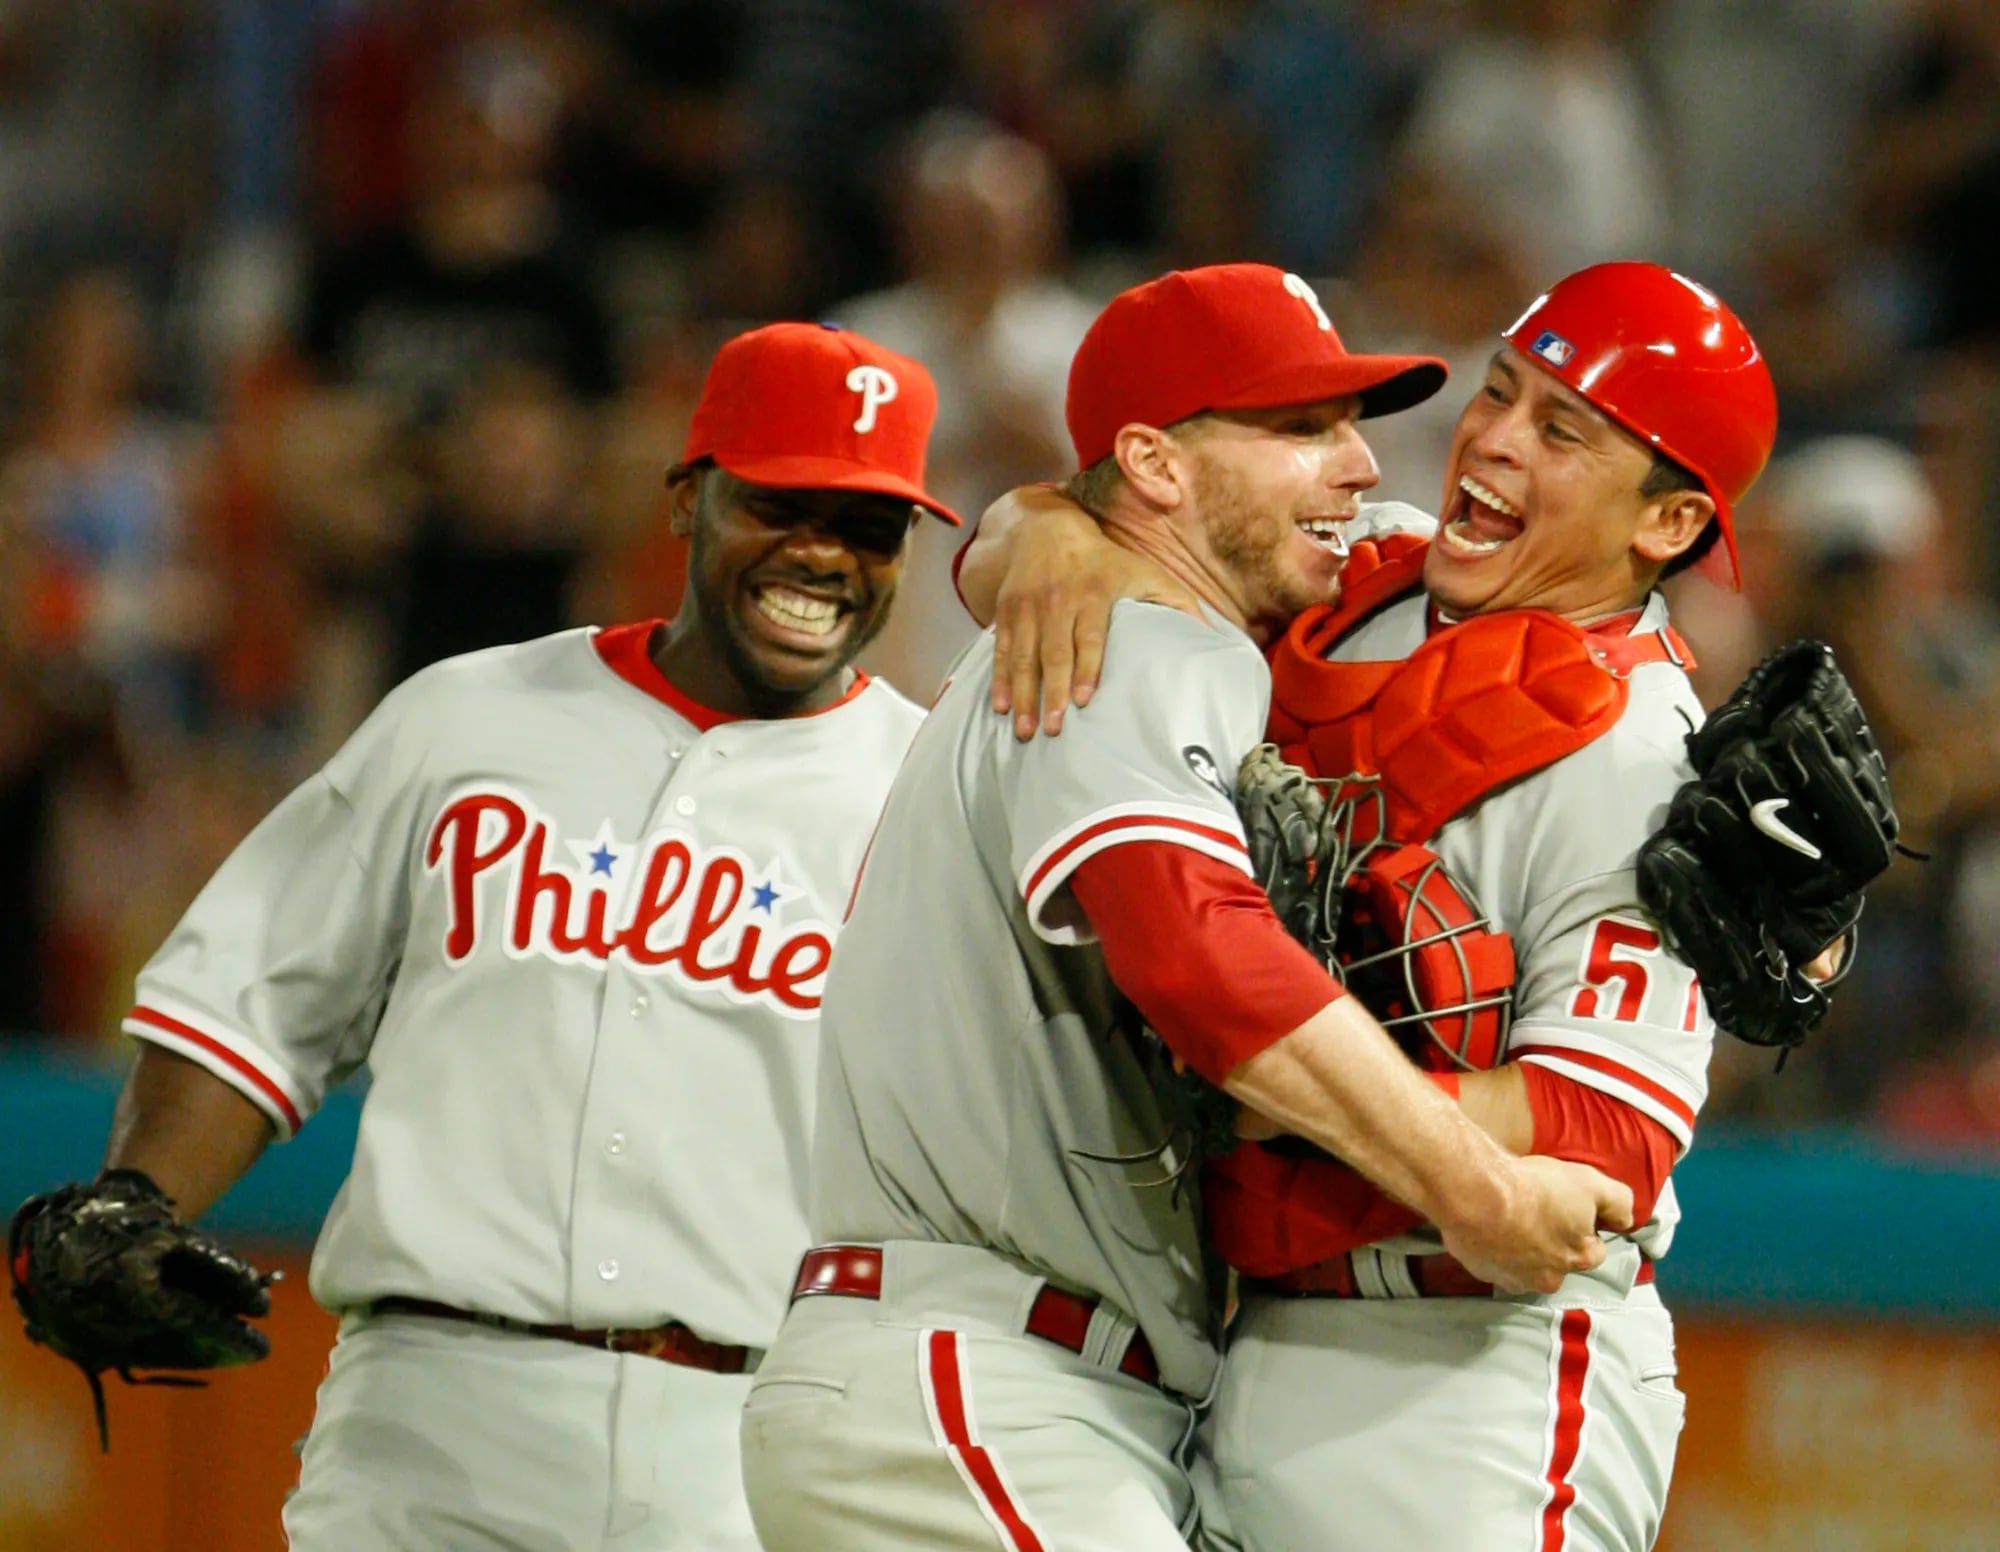 Philadelphia Phillies starting pitcher Roy Halladay, center, celebrates with Carlos Ruiz, right, and Ryan Howard after Halladay threw a perfect game against the Florida Marlins on May 29, 2010.